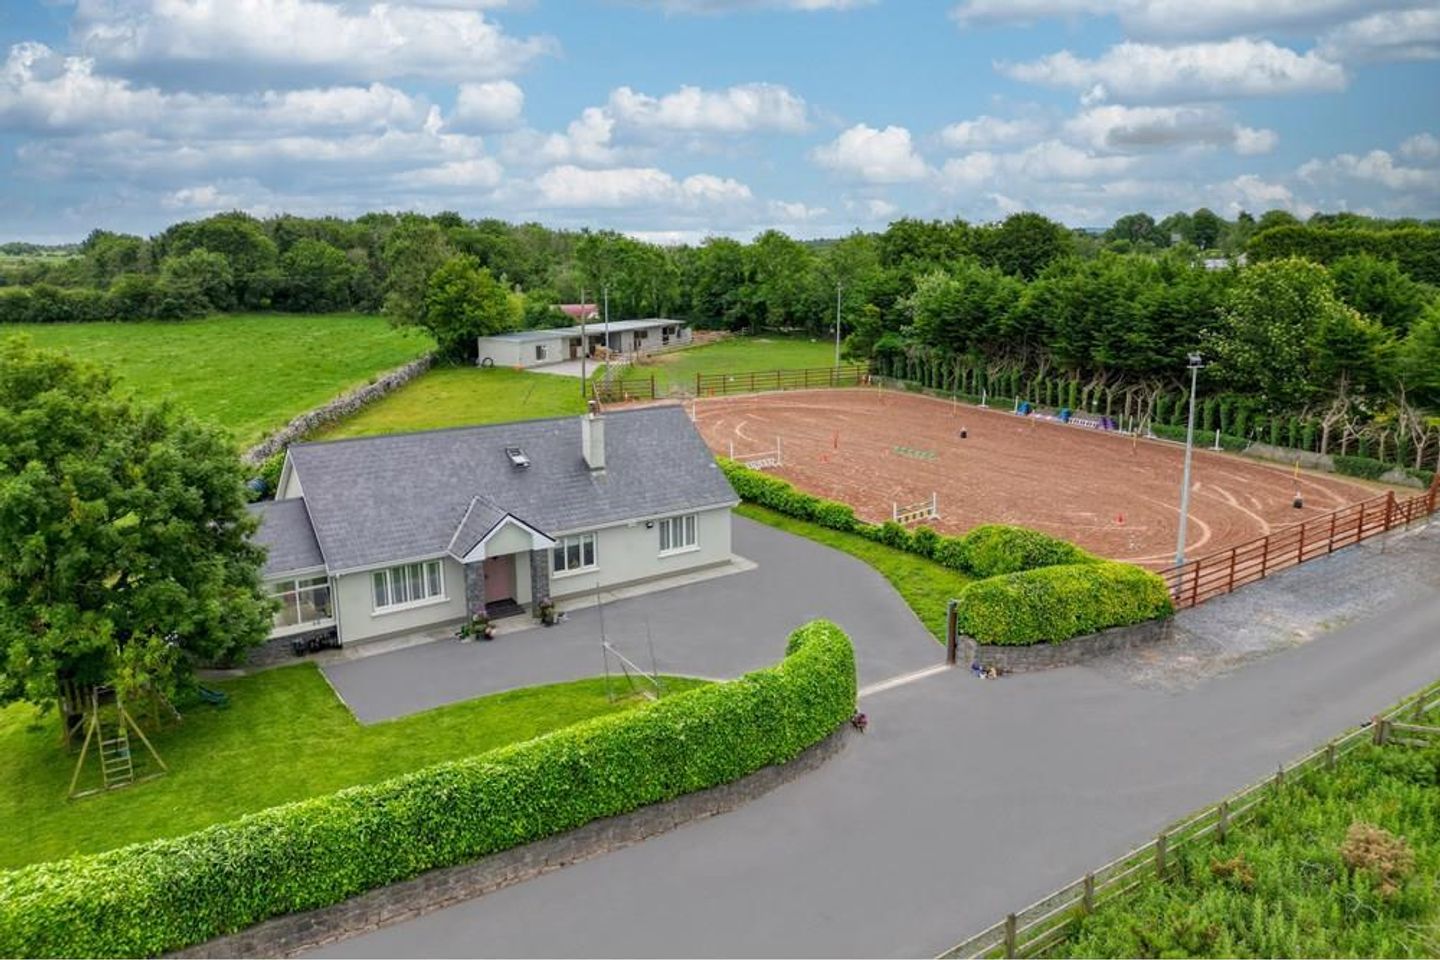 Detached House with Stables + Arena, Carnane, Kilcolgan, Co. Galway, H91D6XE